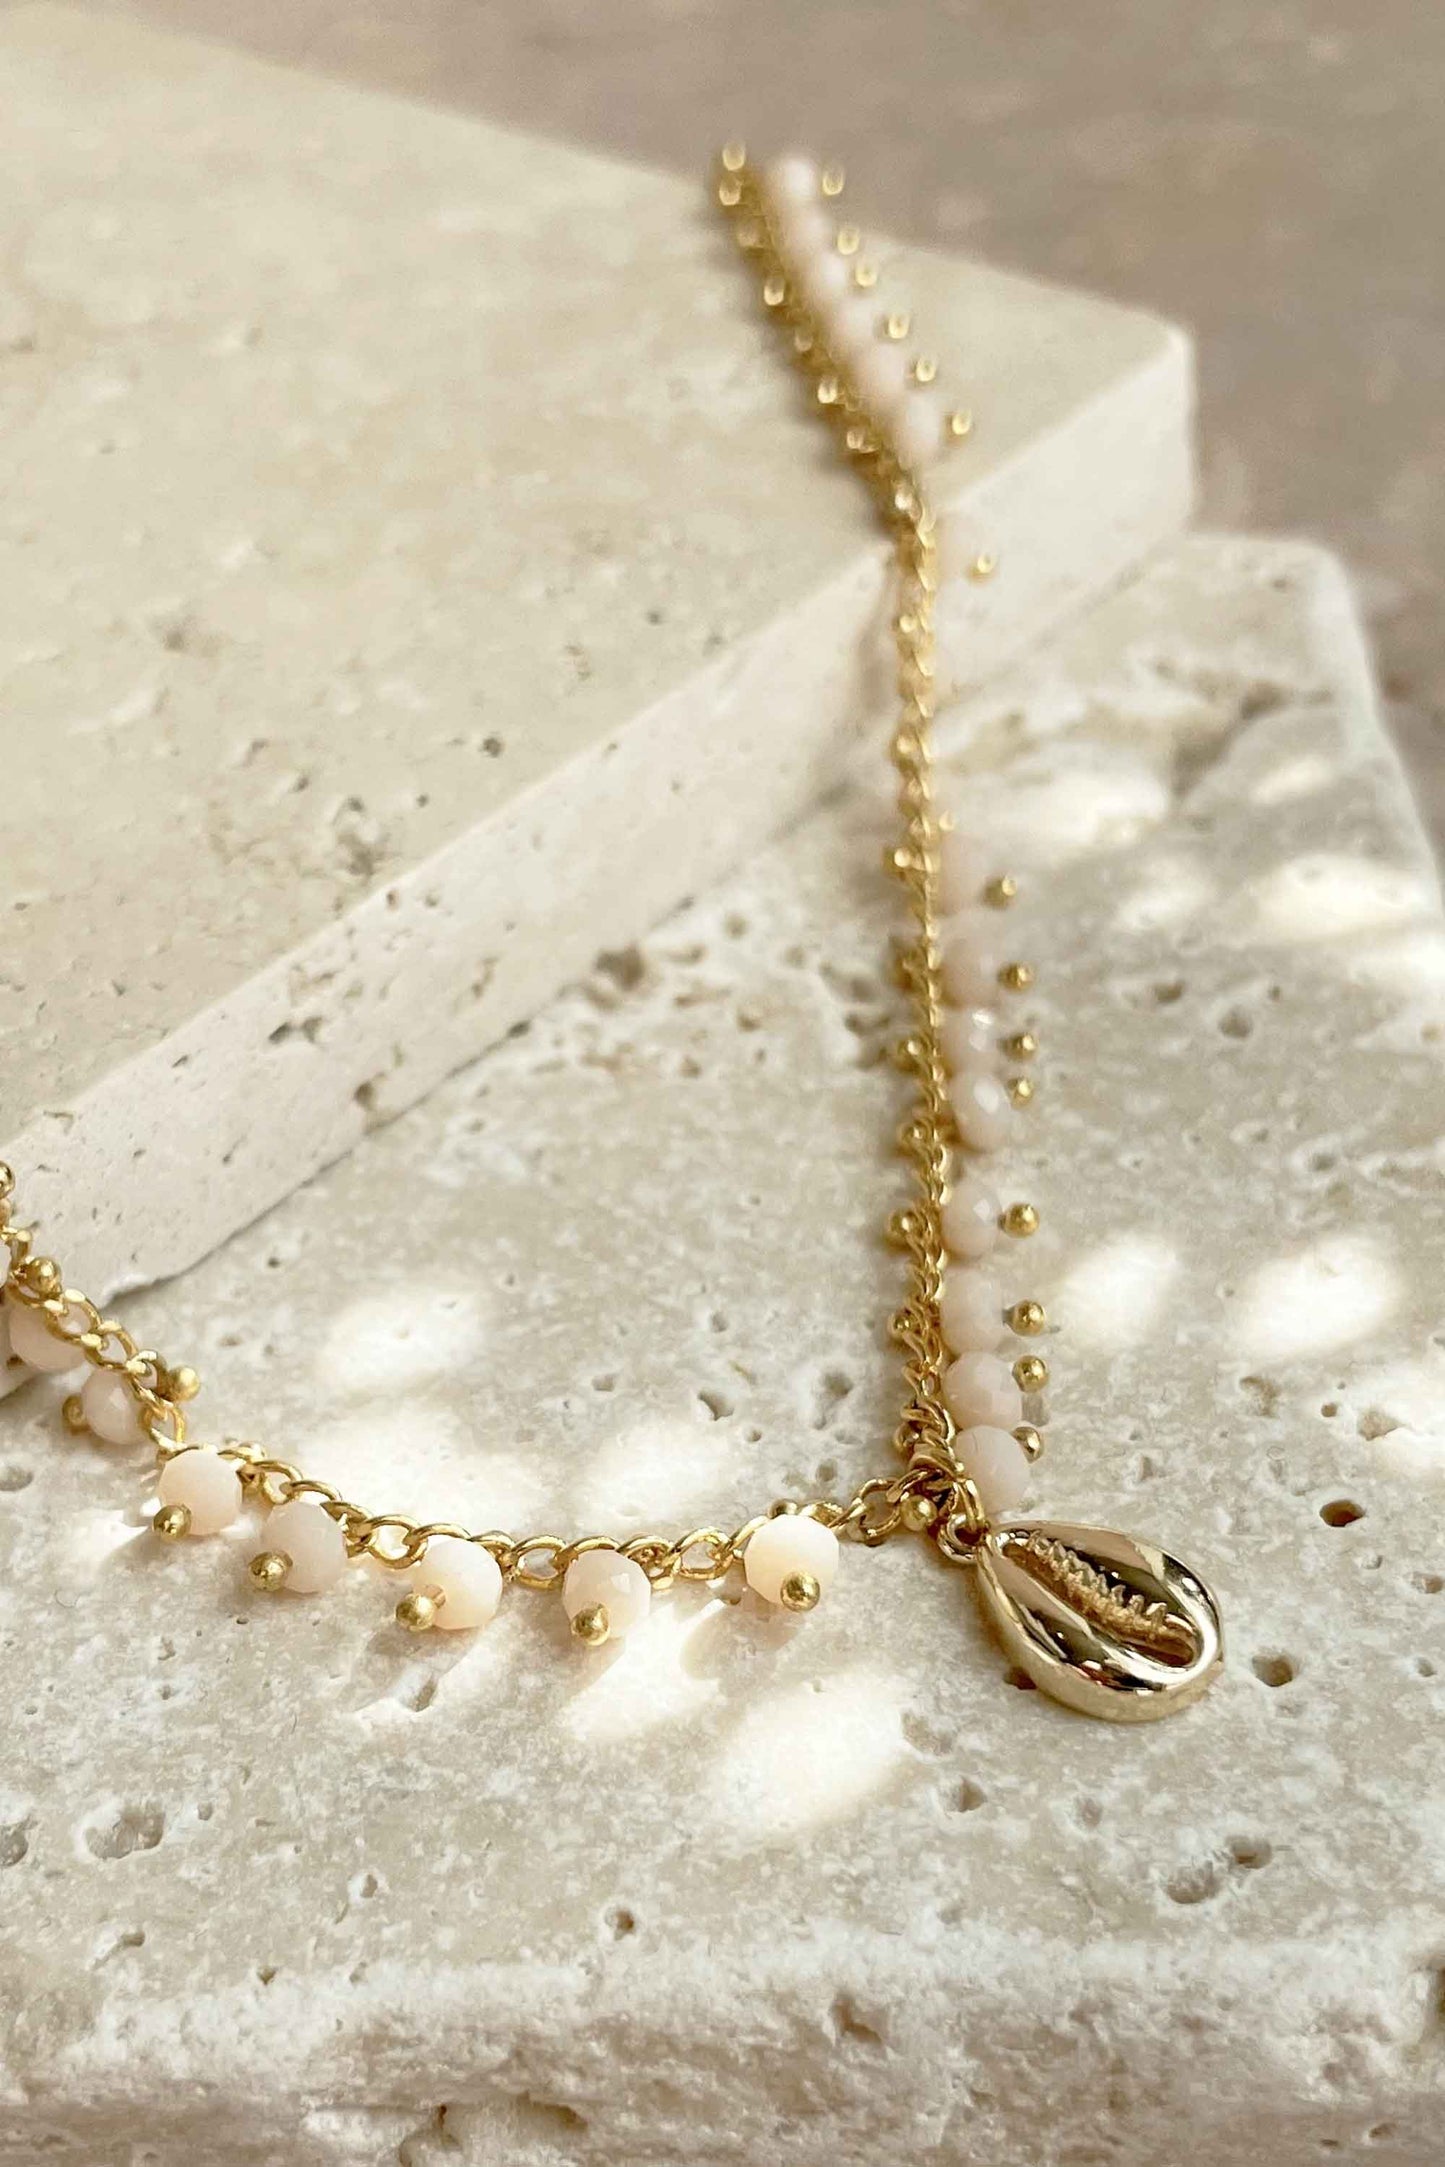 GOLD-BEADED-NECKLACE-COWRIE-SHELL-FLAT-LAY-CLOSE